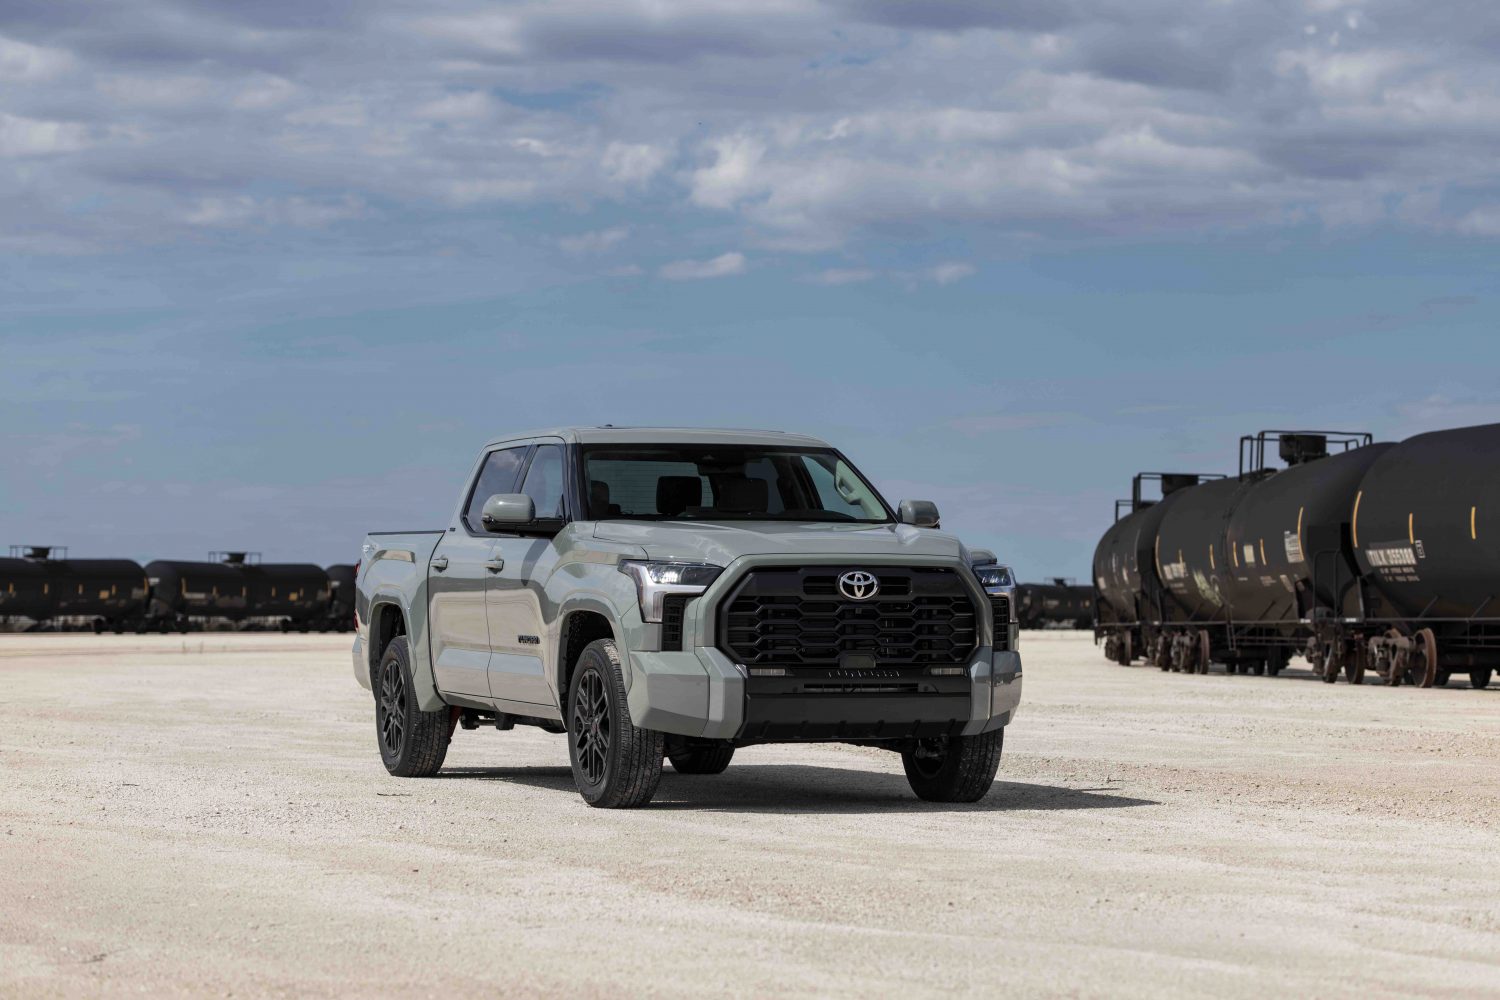 The 2022 Toyota Tundra on the road